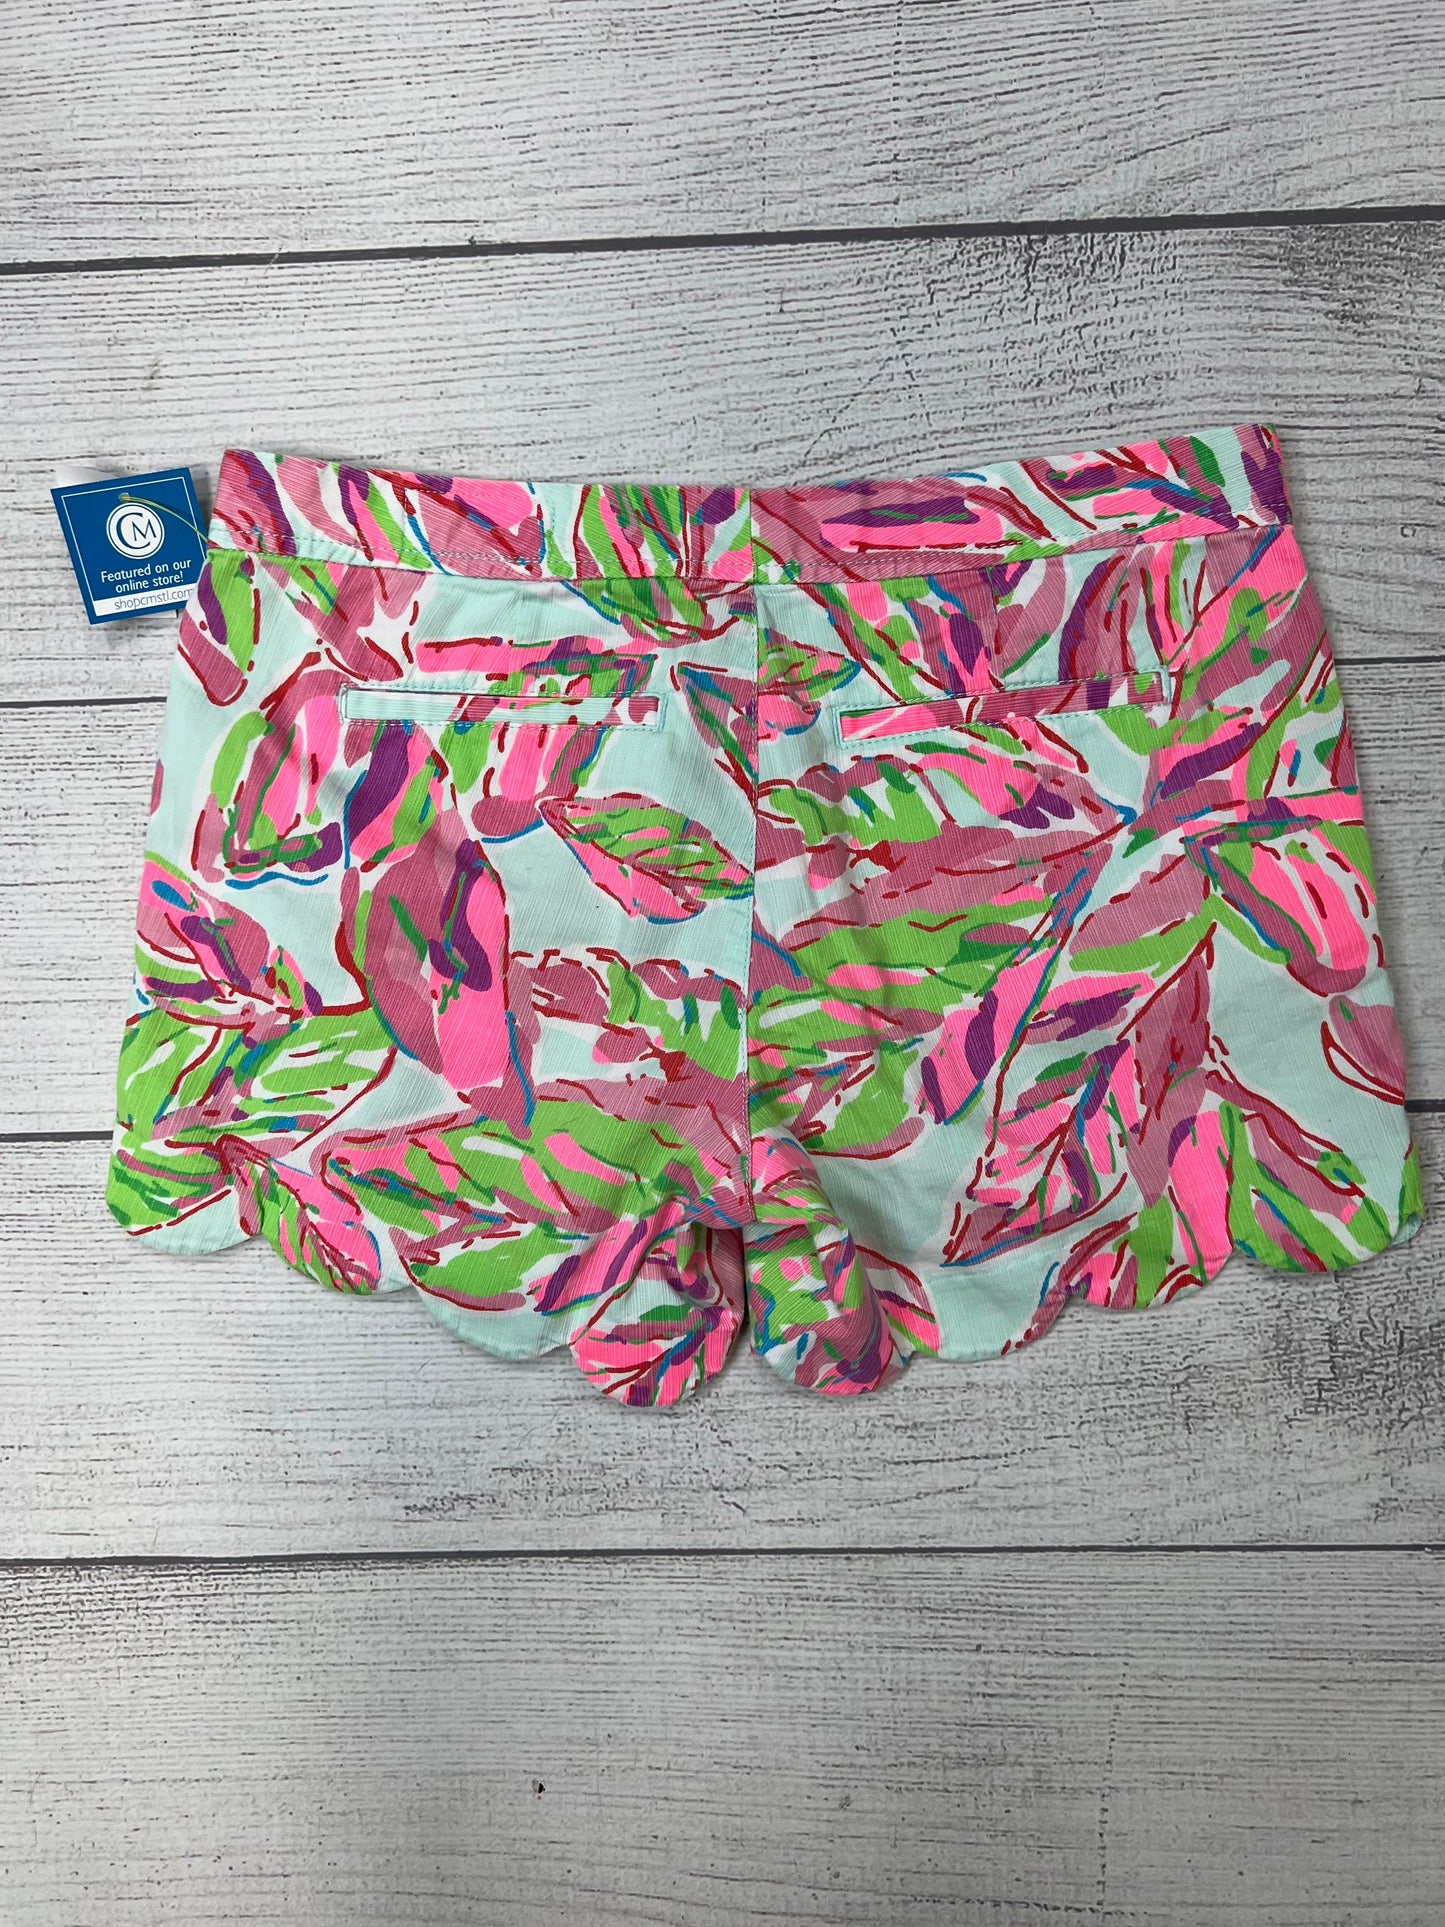 Multi-Colored Shorts Lilly Pulitzer, Size 6